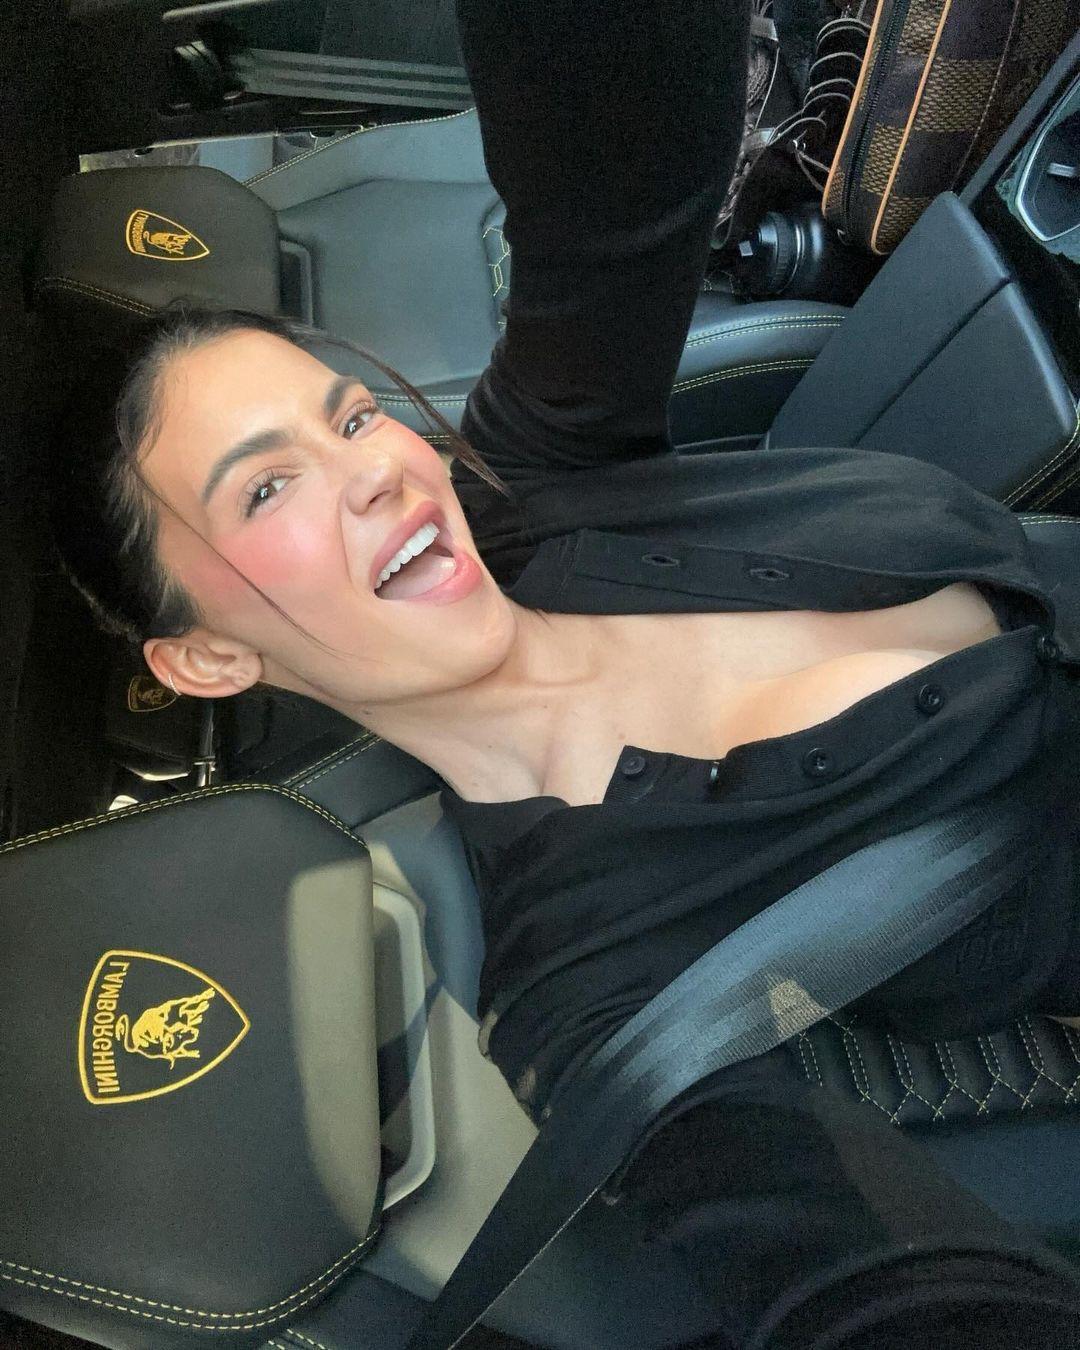 Kylie Jenner snaps a selfie inide her lambo while wearing a plunging black top.